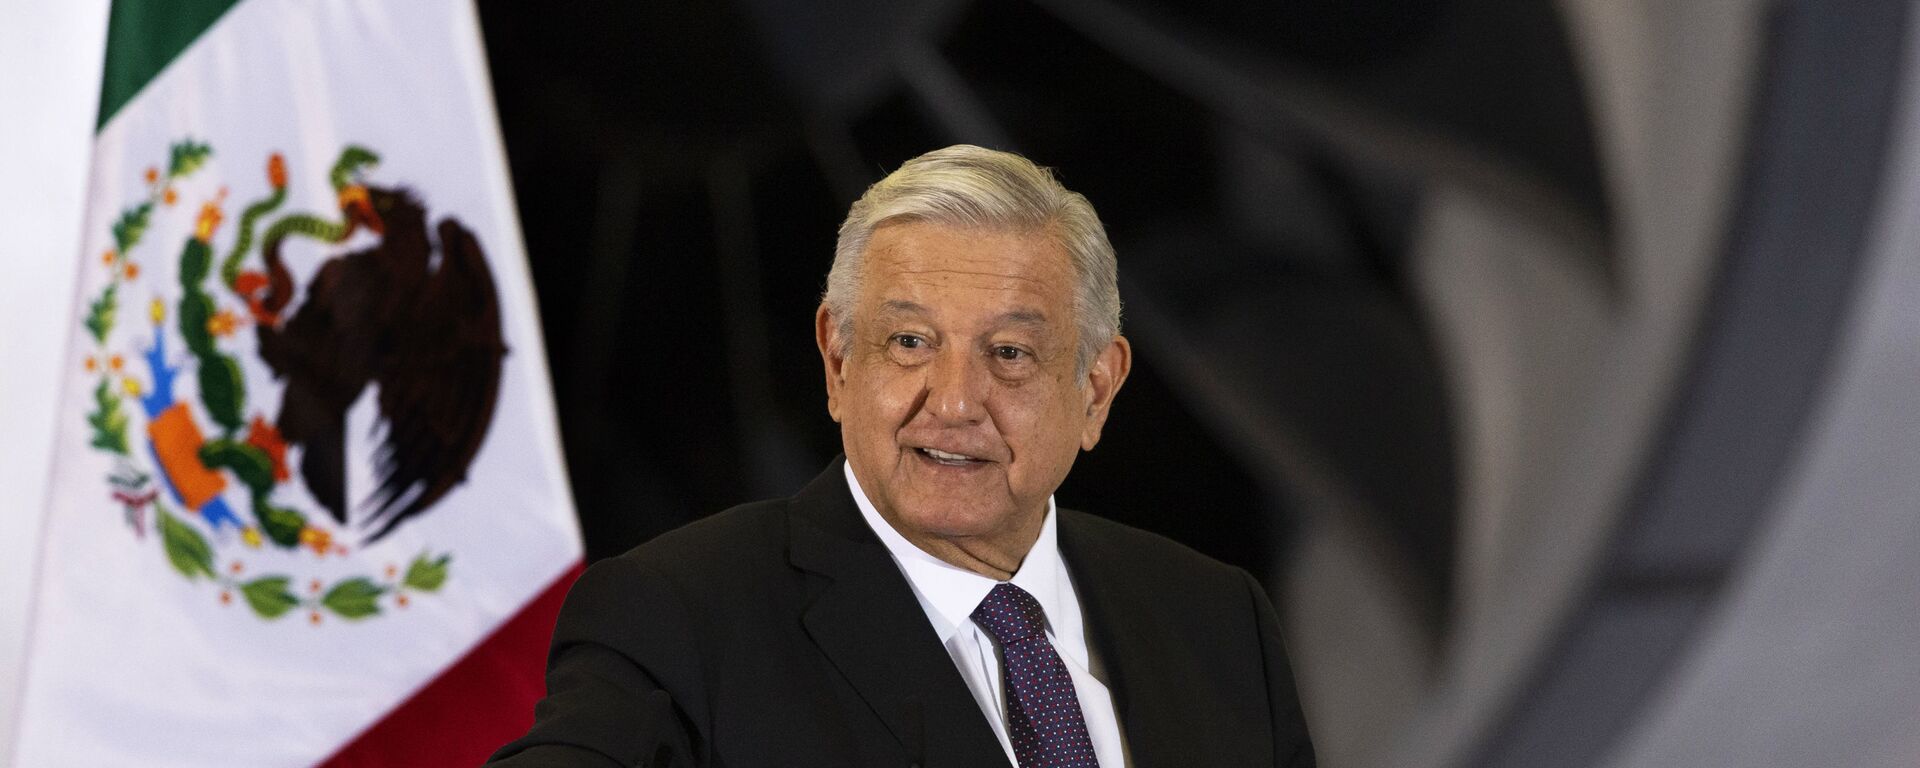 In this July 27, 2020 file photo, Mexican President Andres Manuel Lopez Obrador gives his daily, morning press conference in front of the former presidential plane that has been for sale since he took office, at Benito Juarez International Airport in Mexico City - Sputnik International, 1920, 19.03.2023